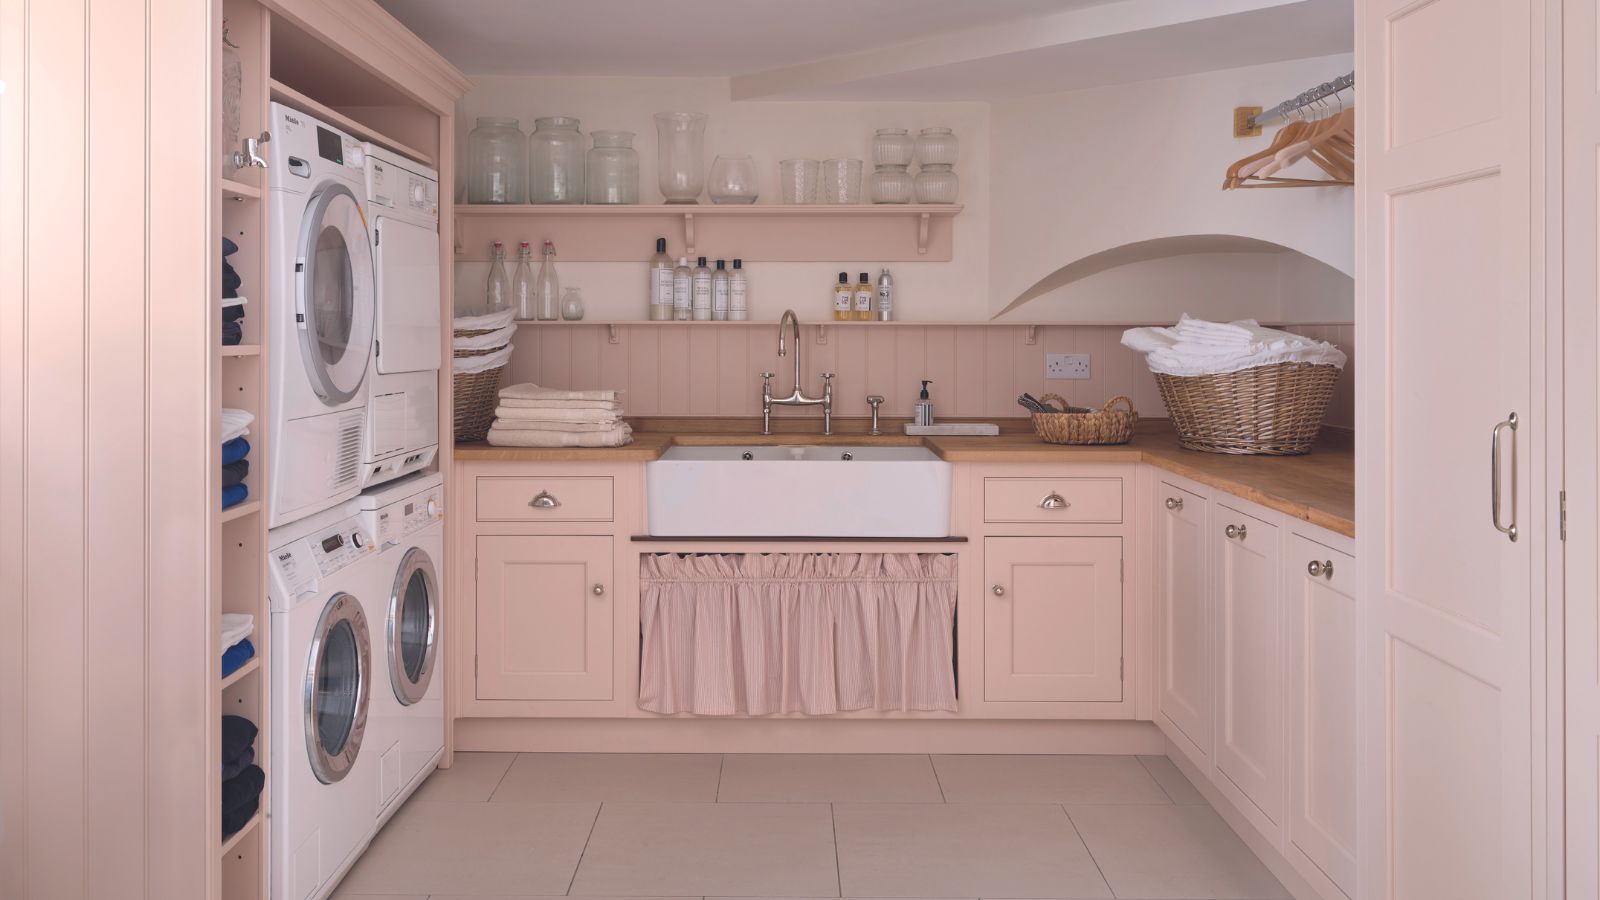 How to design a laundry room: expert layout and design tips